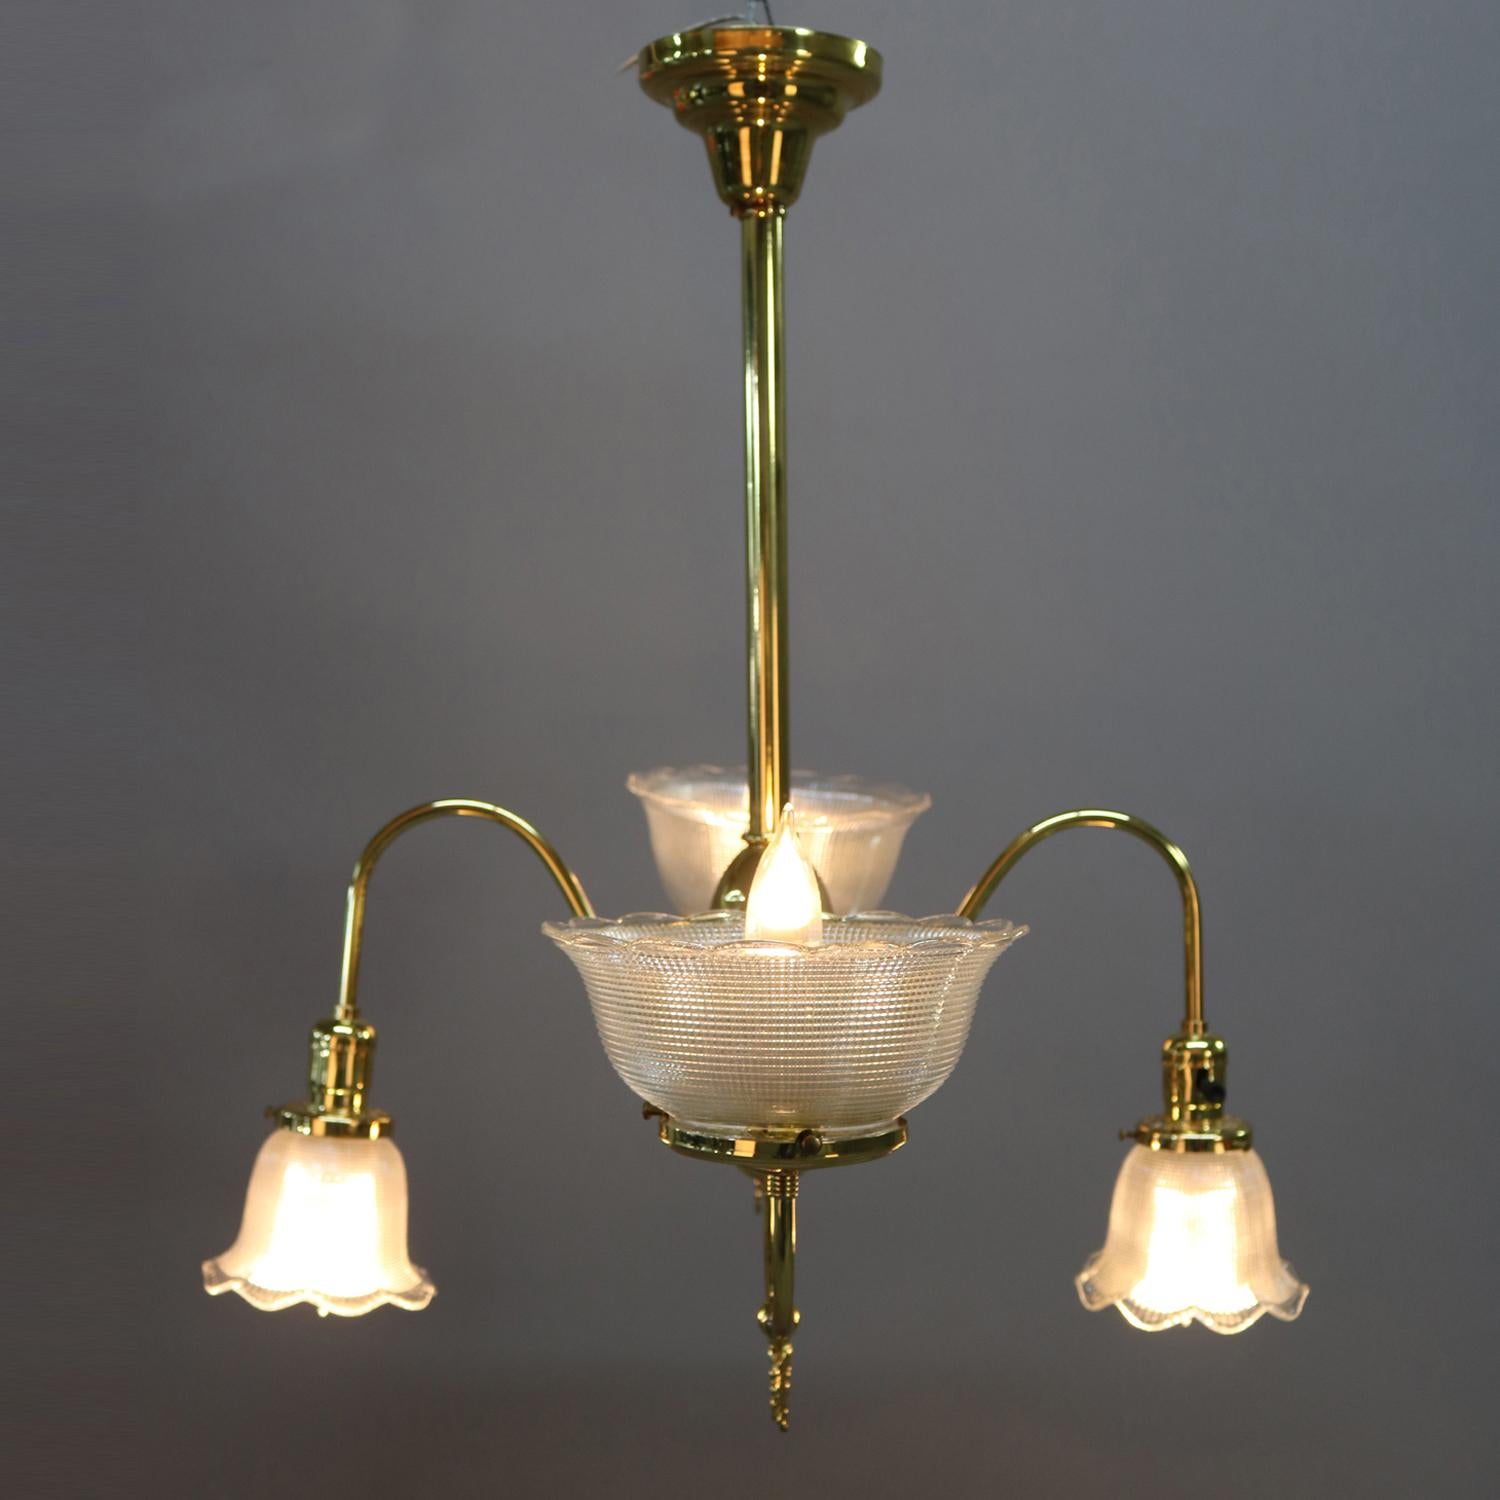 Pressed Antique Victorian Brass Gas Conversion Style Up & Down Five-Light Chandelier